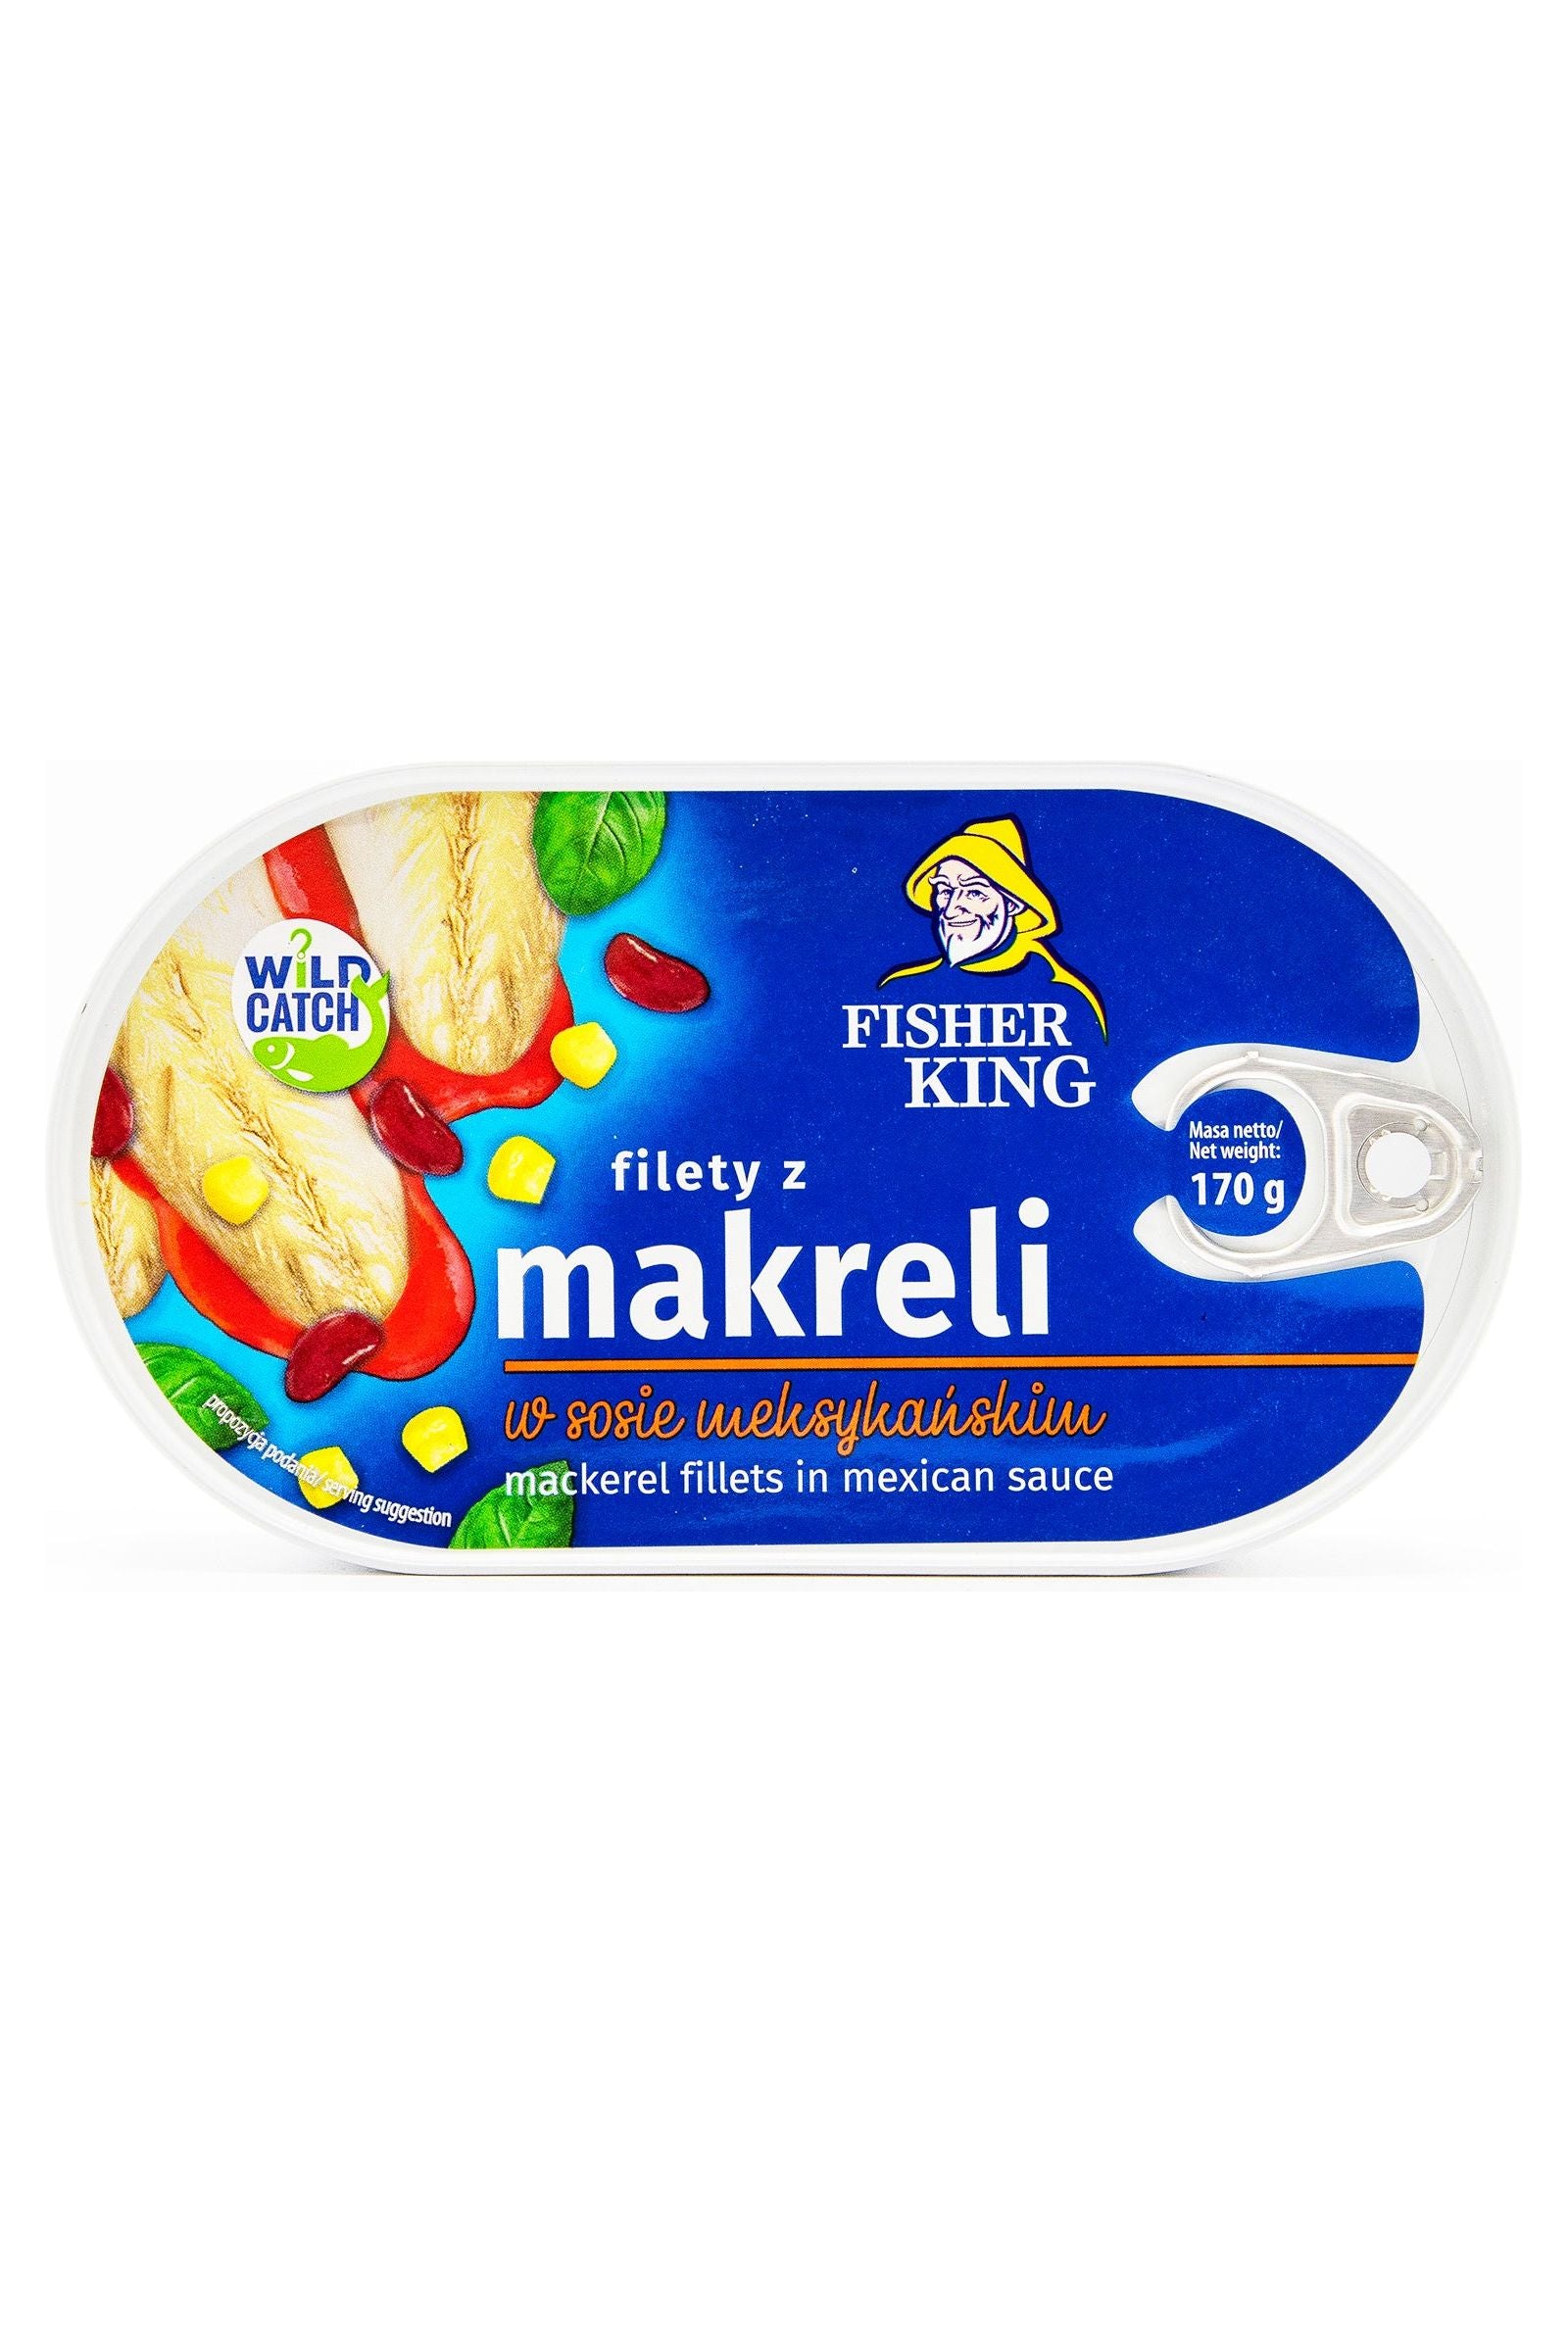 Mackerel Fillets in Mexican Sauce - Fisher King - 170g